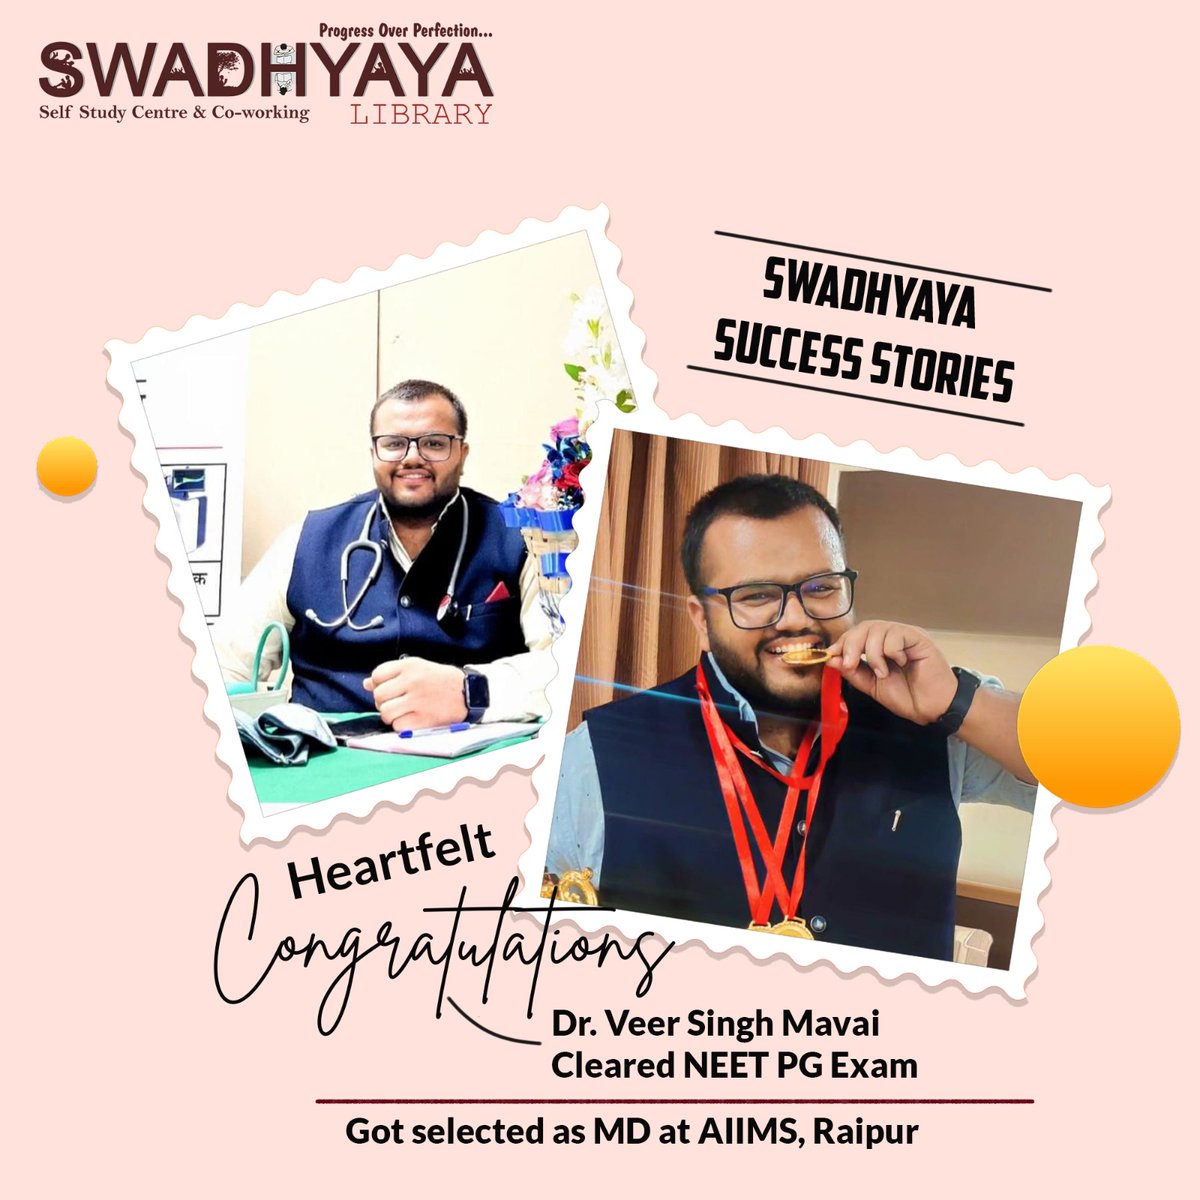 From Diligent Study to MD Triumph: Dr. Veer Singh Mavai's Swadhyaya Journey Shines Bright at AIIMS Raipur😊
.
.
.

#SwadhyayaLibrary #swadhyaya #library #SelfStudy #IndoreLibrary #CoachingStudents #successstory #dreams #library #studentcommunity #quietstudyspace #exampreparation